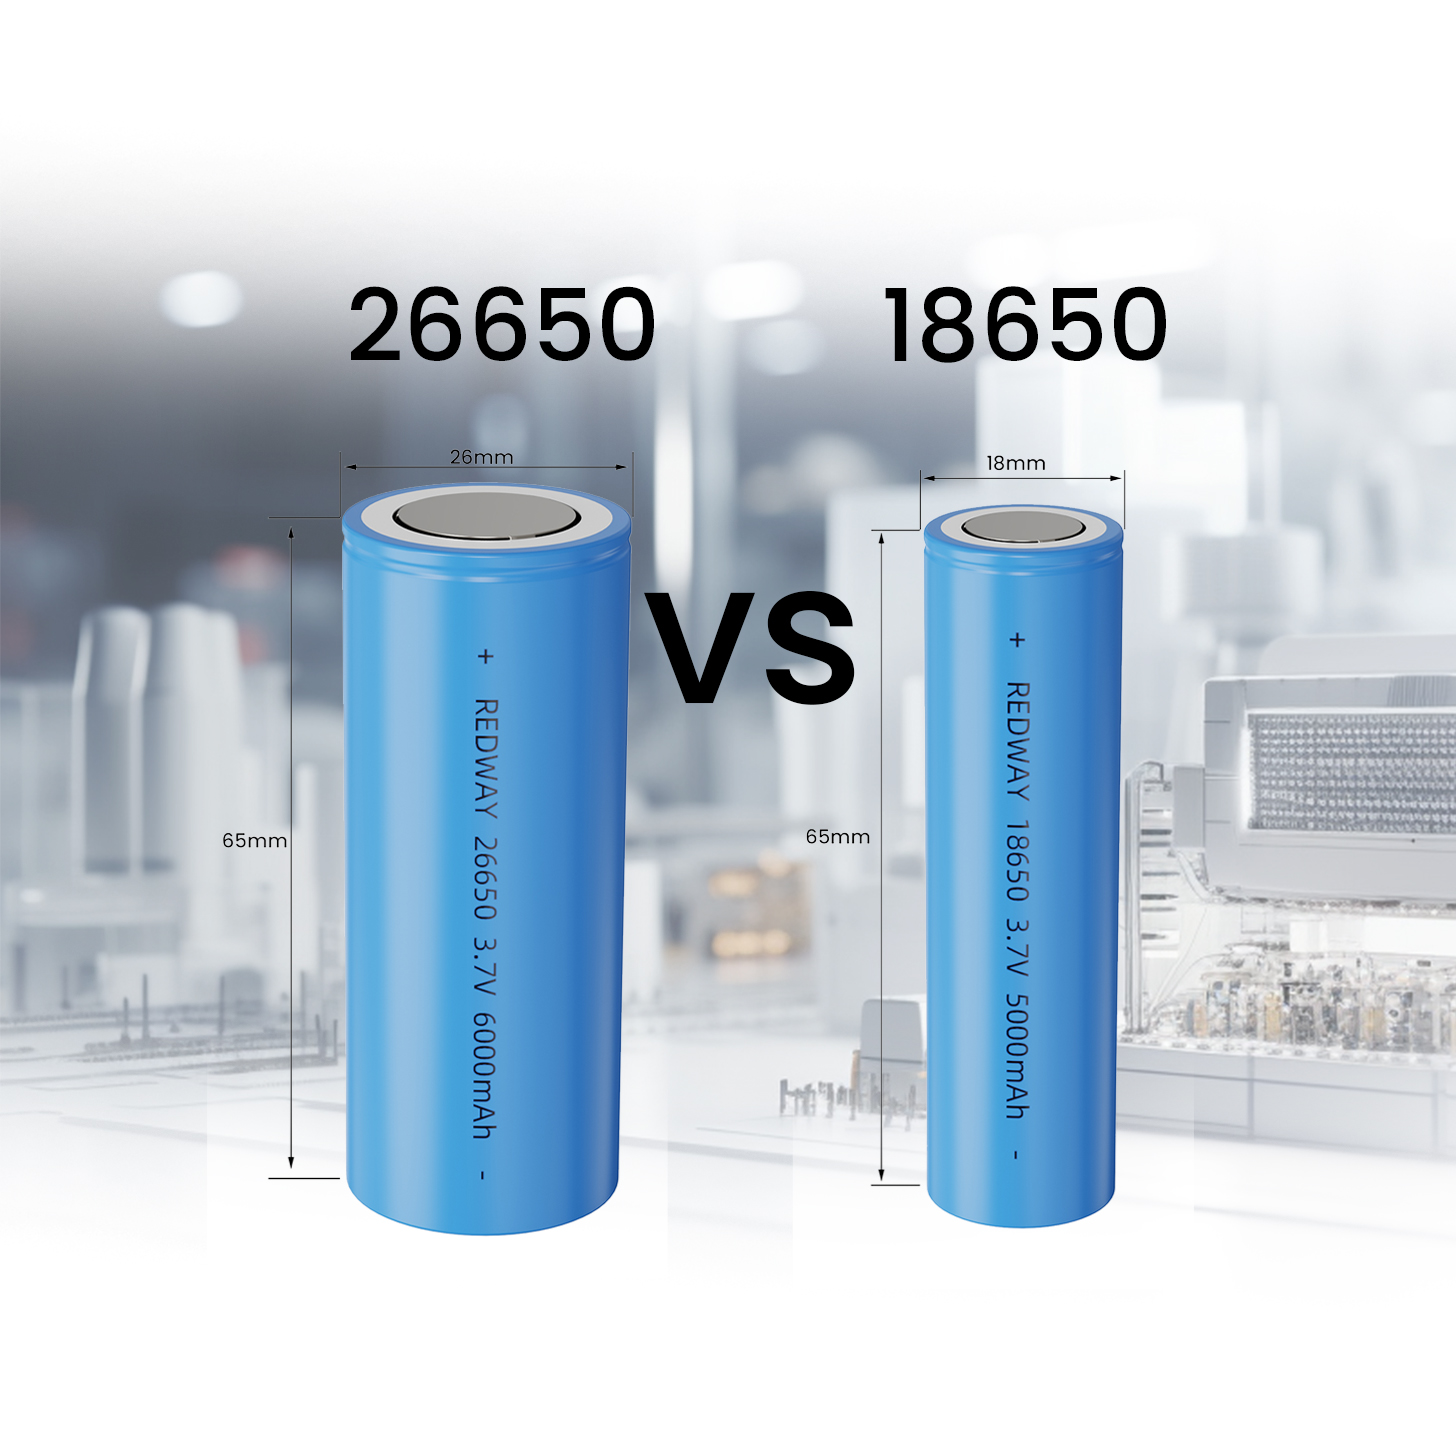 26650 vs 18650 Lithium Battery, What are the Differences?